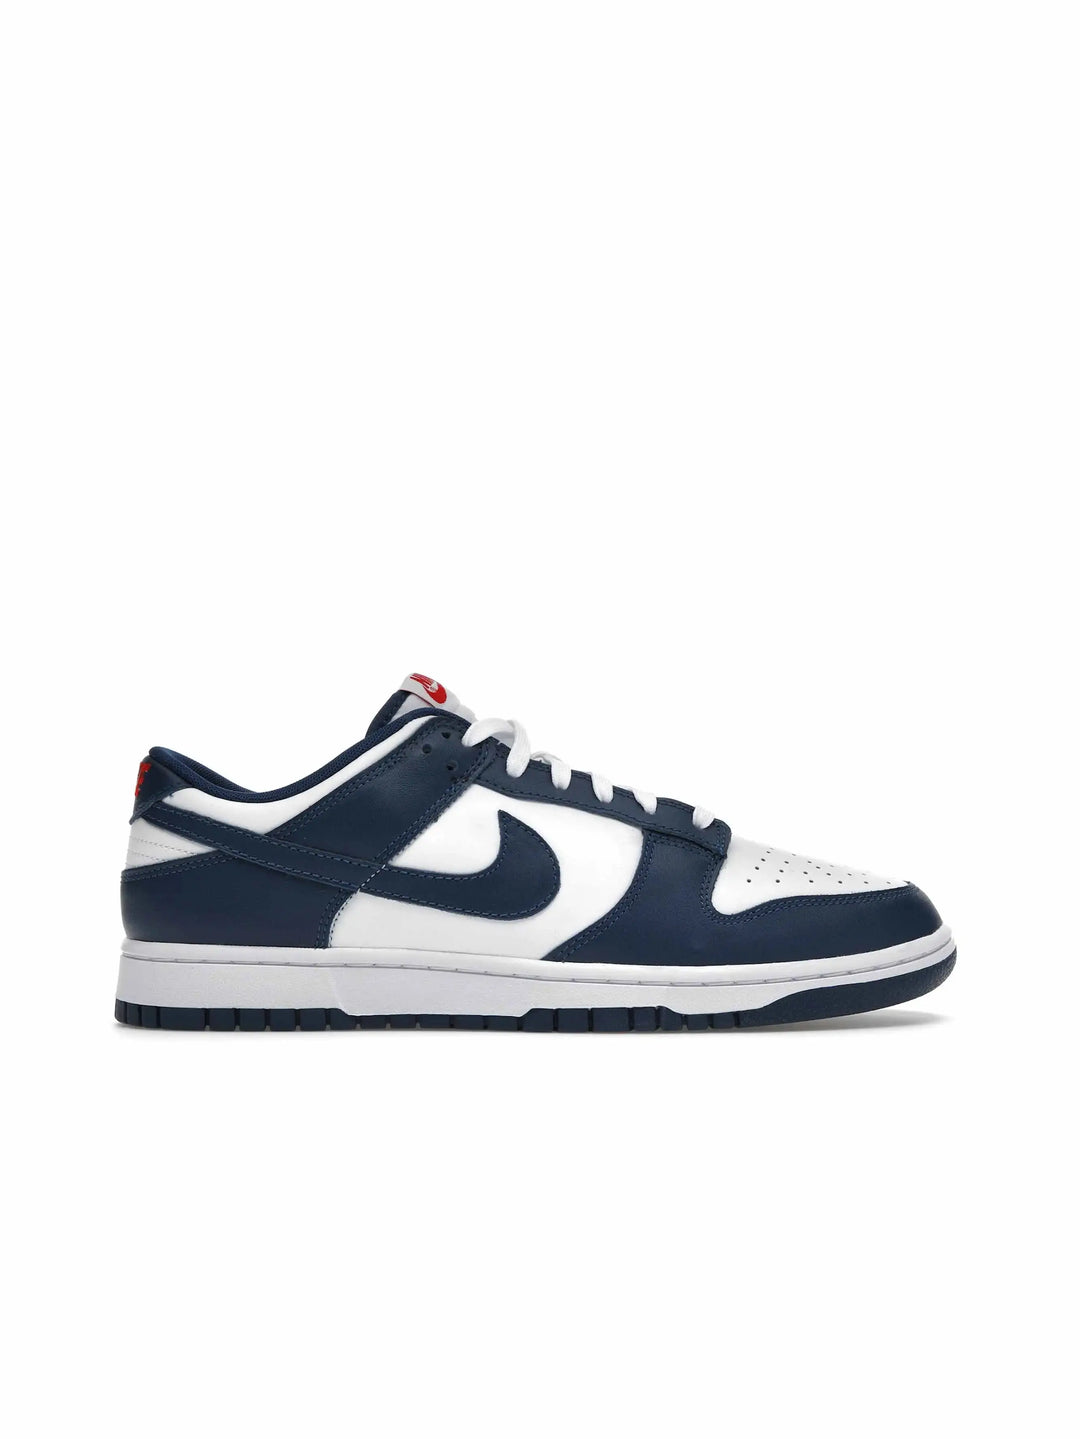 Nike Dunk Low Valerian Blue (REPLACEMENT BOX)